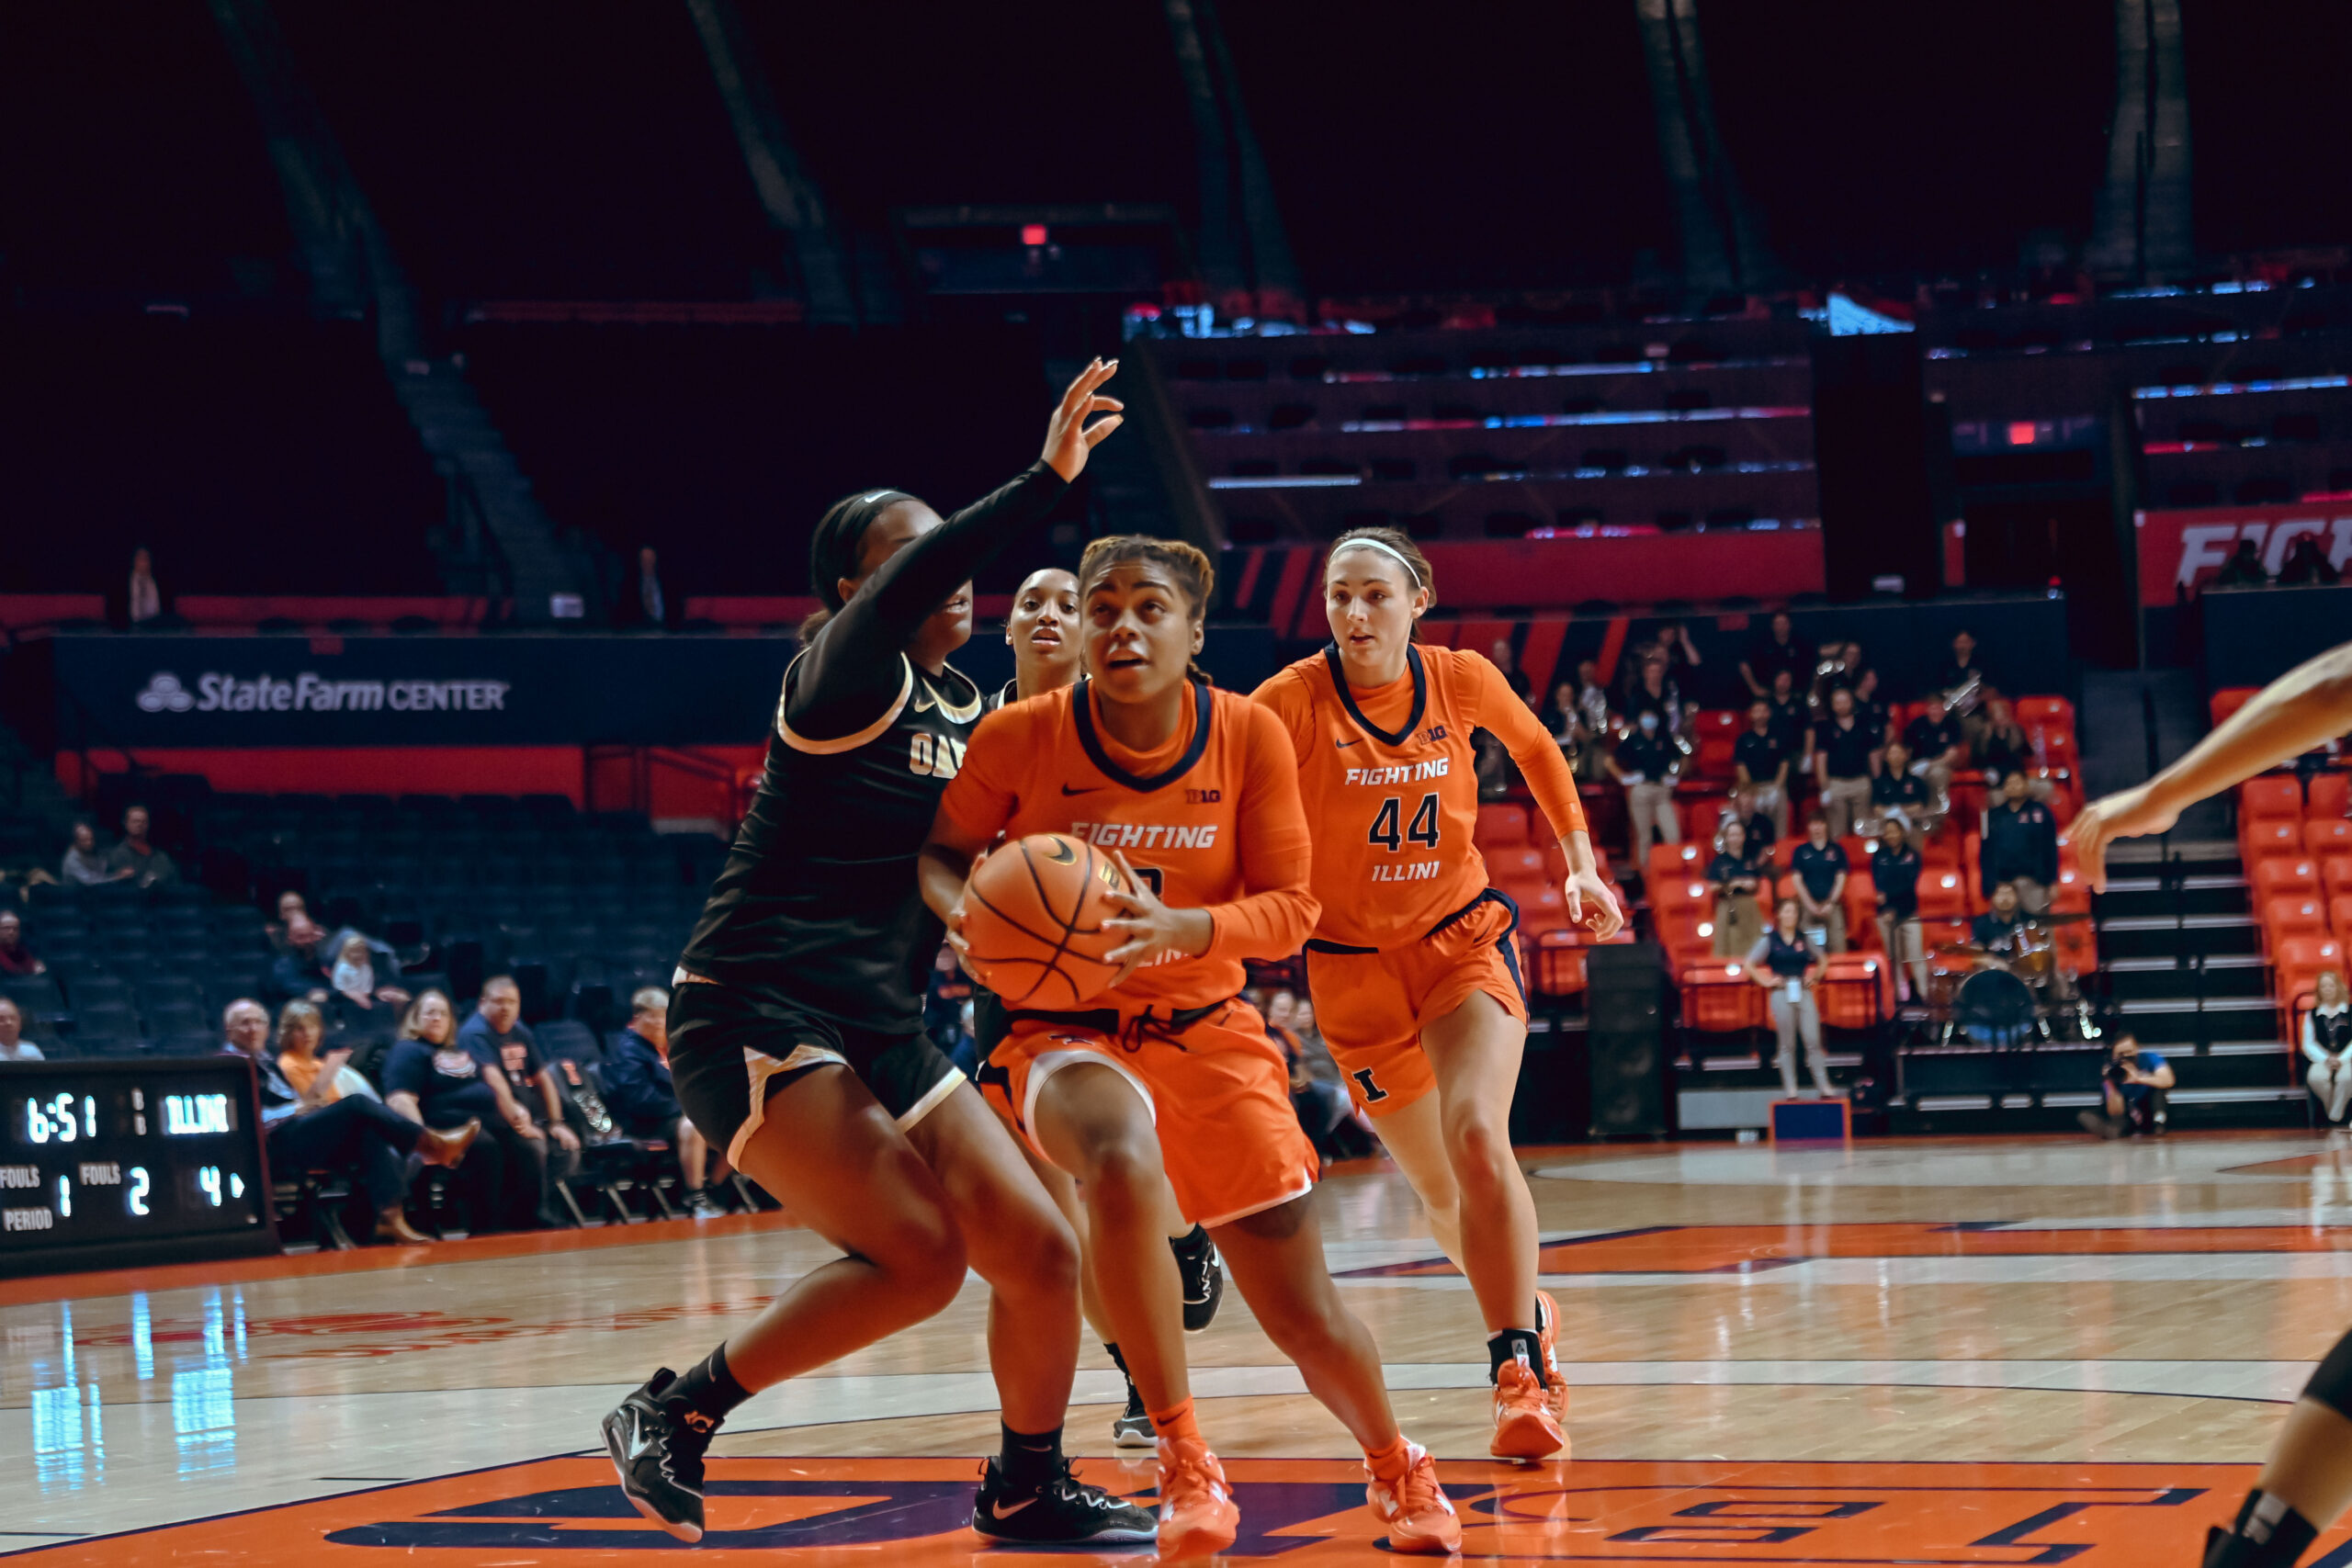  Illini women improve to 5-0 with blowout win over Oakland 